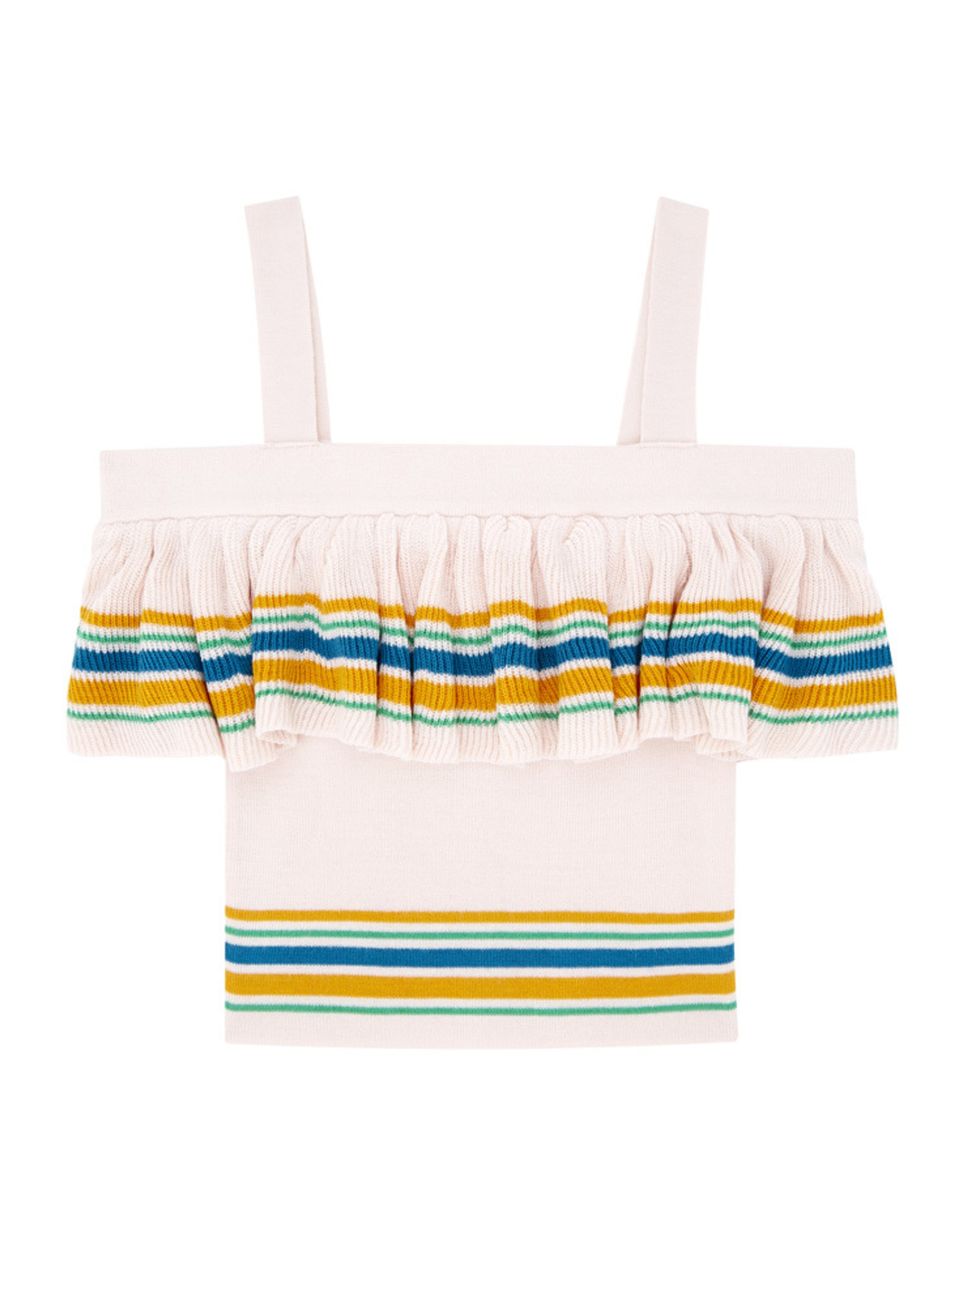 <p><a href="http://www.asos.com/asos/asos-knitted-top-in-off-shoulder-with-stripe-ruffle-detail/prod/pgeproduct.aspx?iid=6317987&clr=Multi&SearchQuery=stripe&pgesize=36&pge=0&totalstyles=2878&gridsize=3&gridrow=1&gridcolumn=3" target="_blank">ASOS</a> ruf